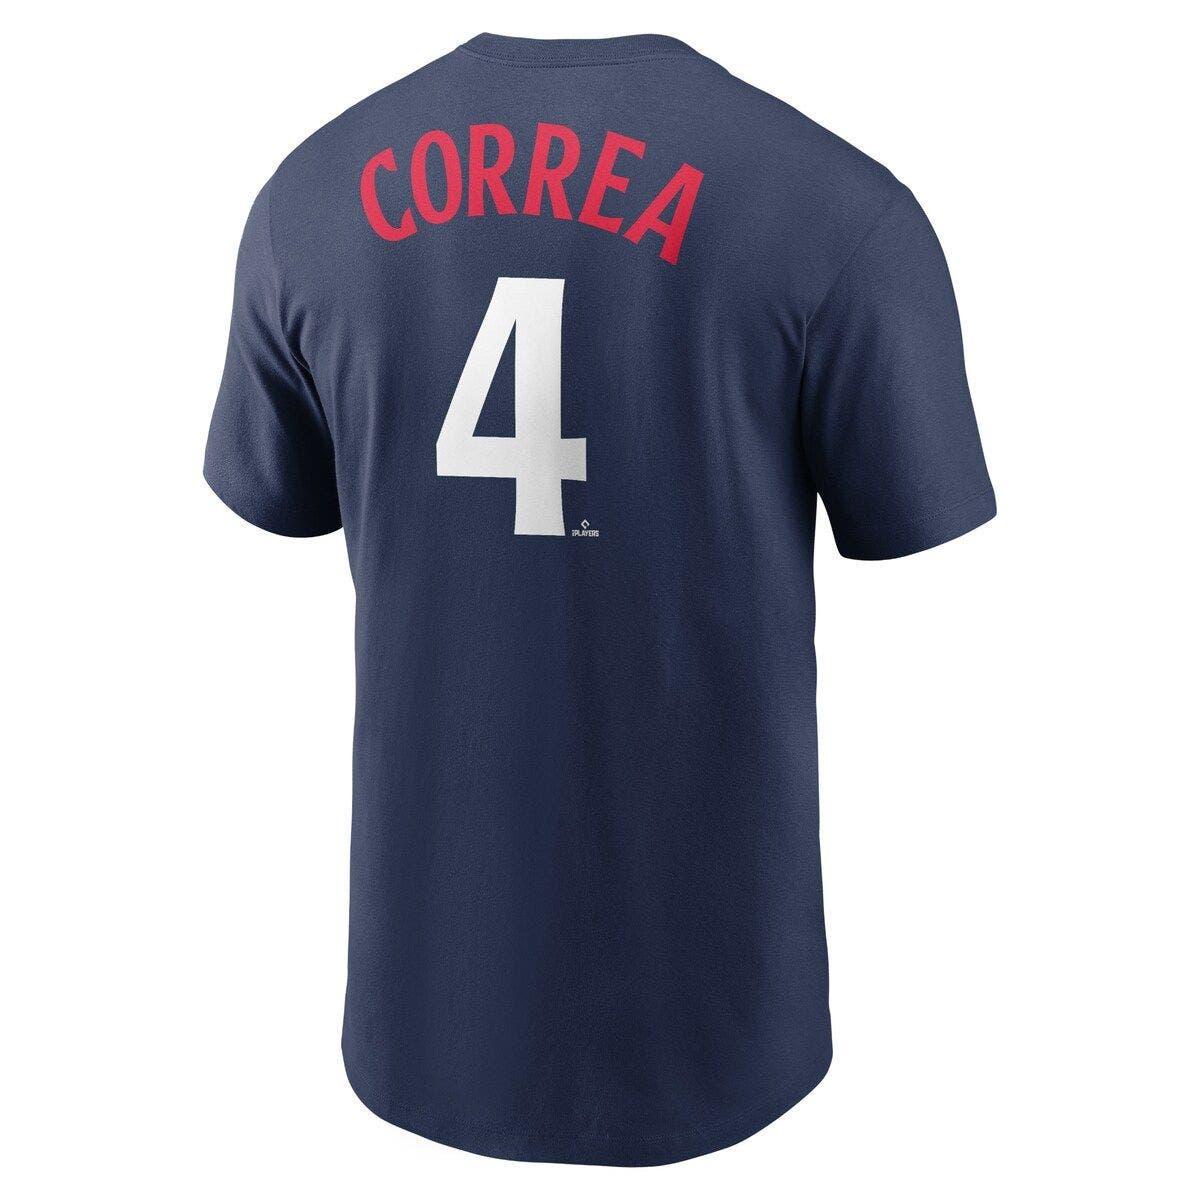 Carlos Correa jersey: Carlos Correa Twins jersey: What number does